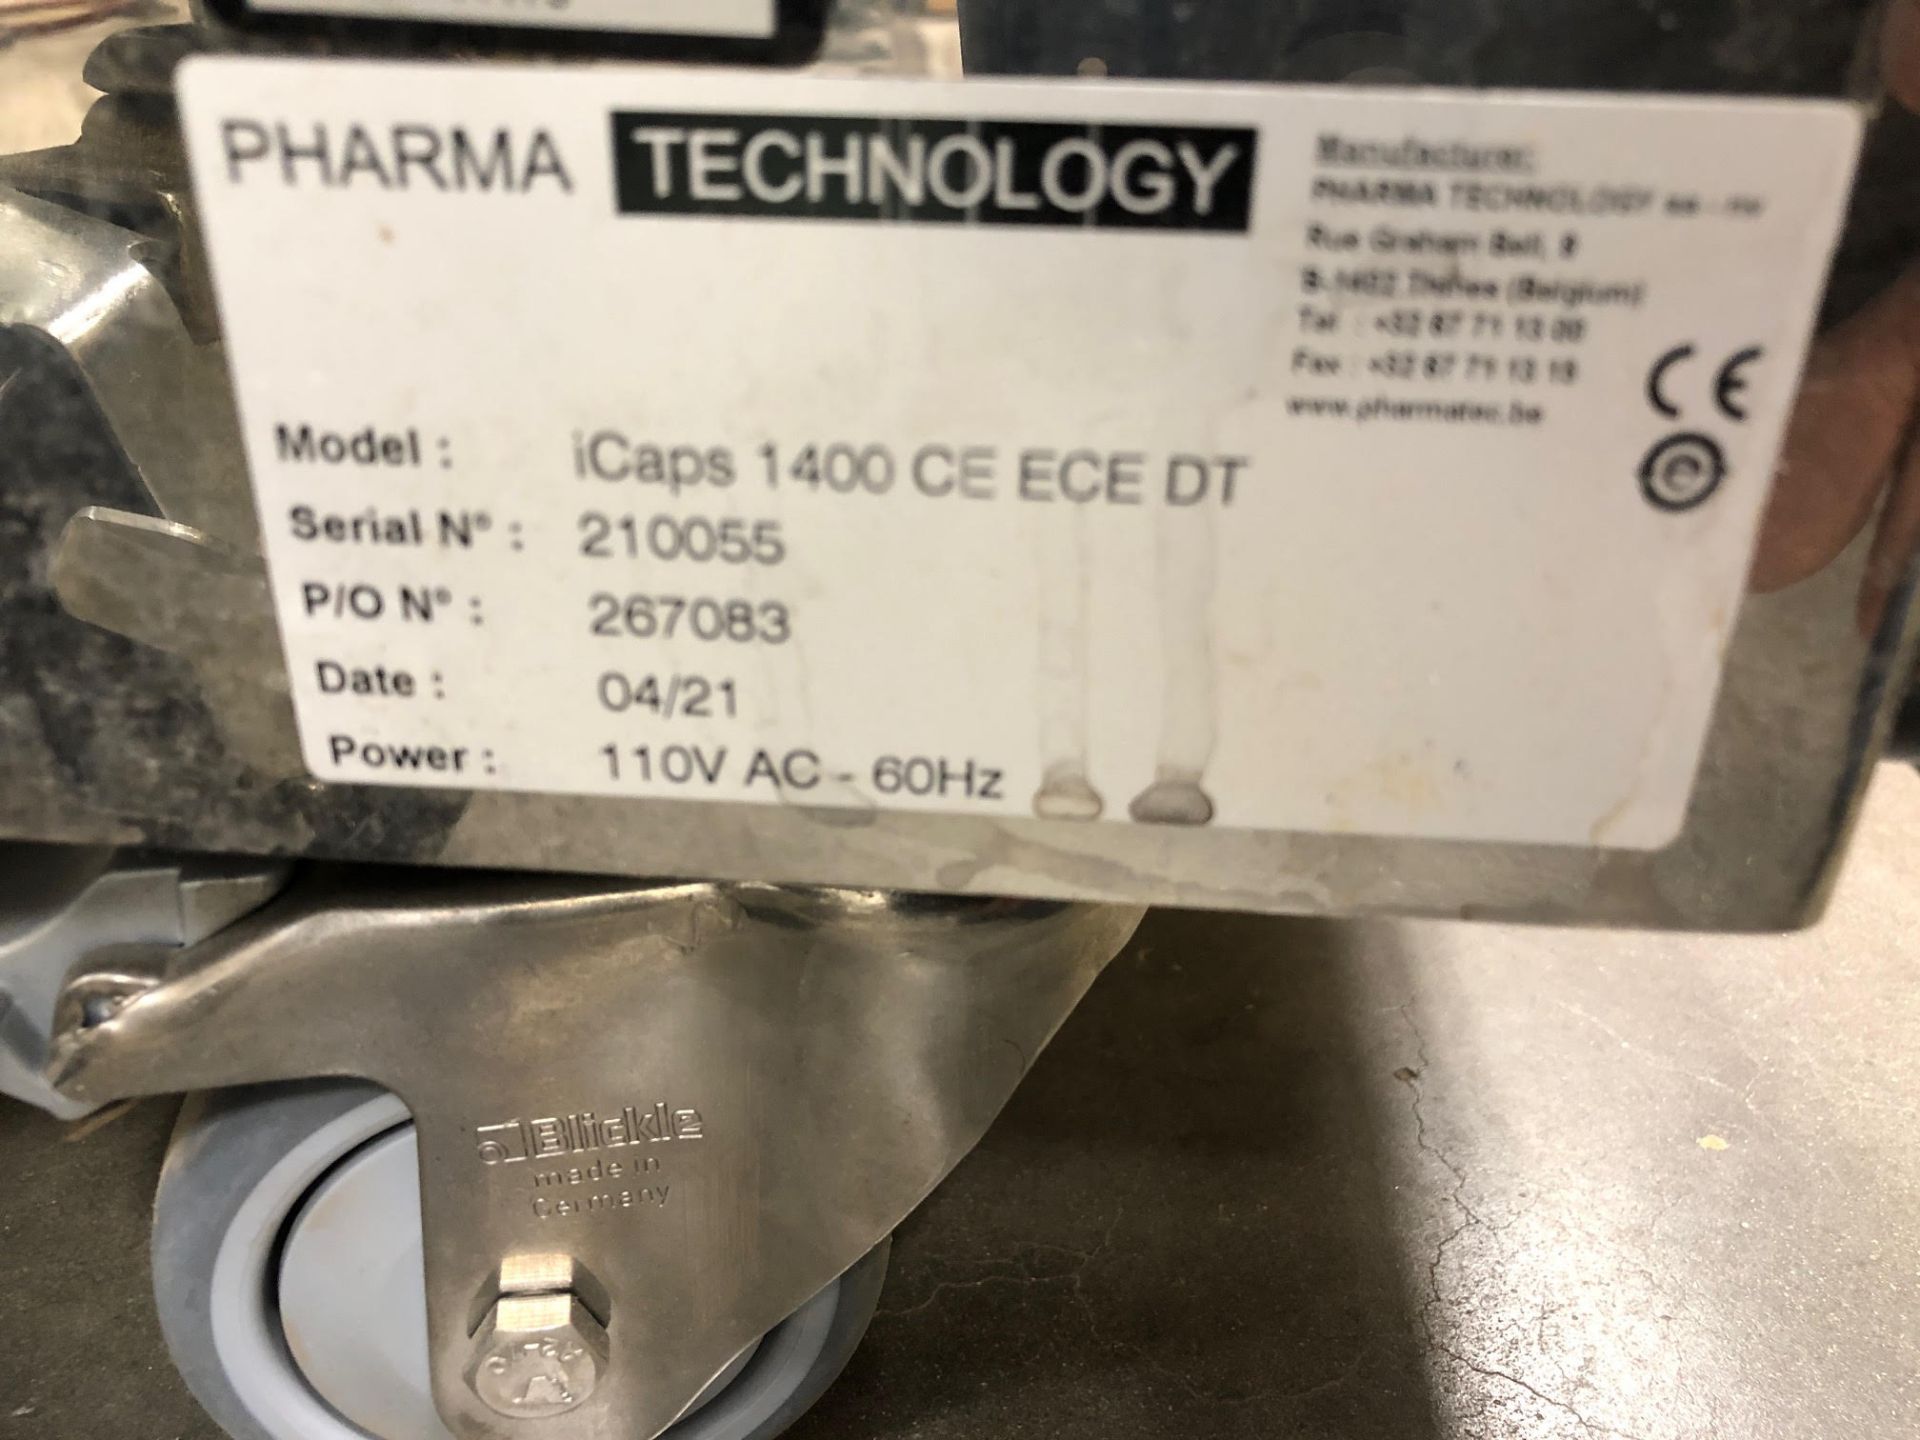 New! Pharma Technologies Vertical 5 Model iCaps 1400 CE ECE DT Capsule Polisher w/ Metal Check - Image 2 of 28